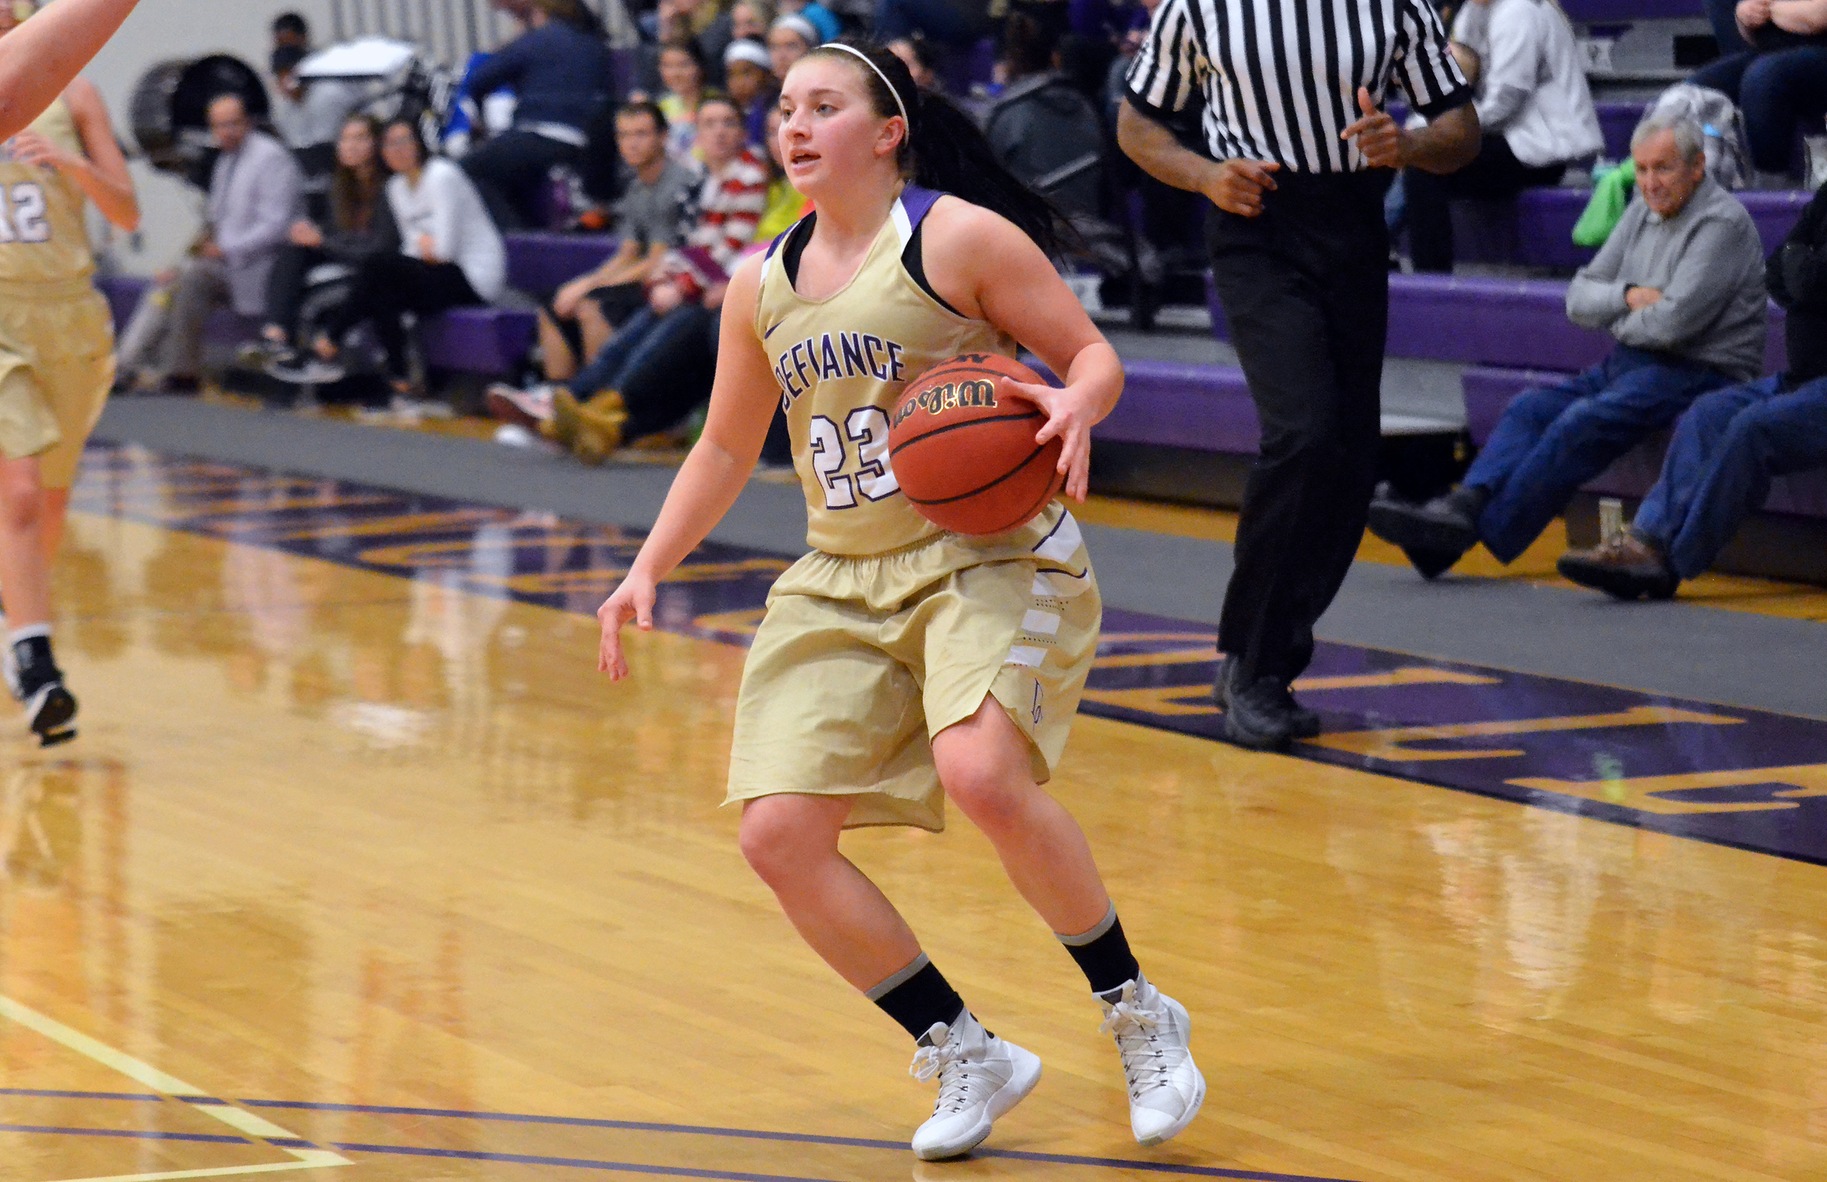 Defiance Downed In 75-47 Loss to Albion